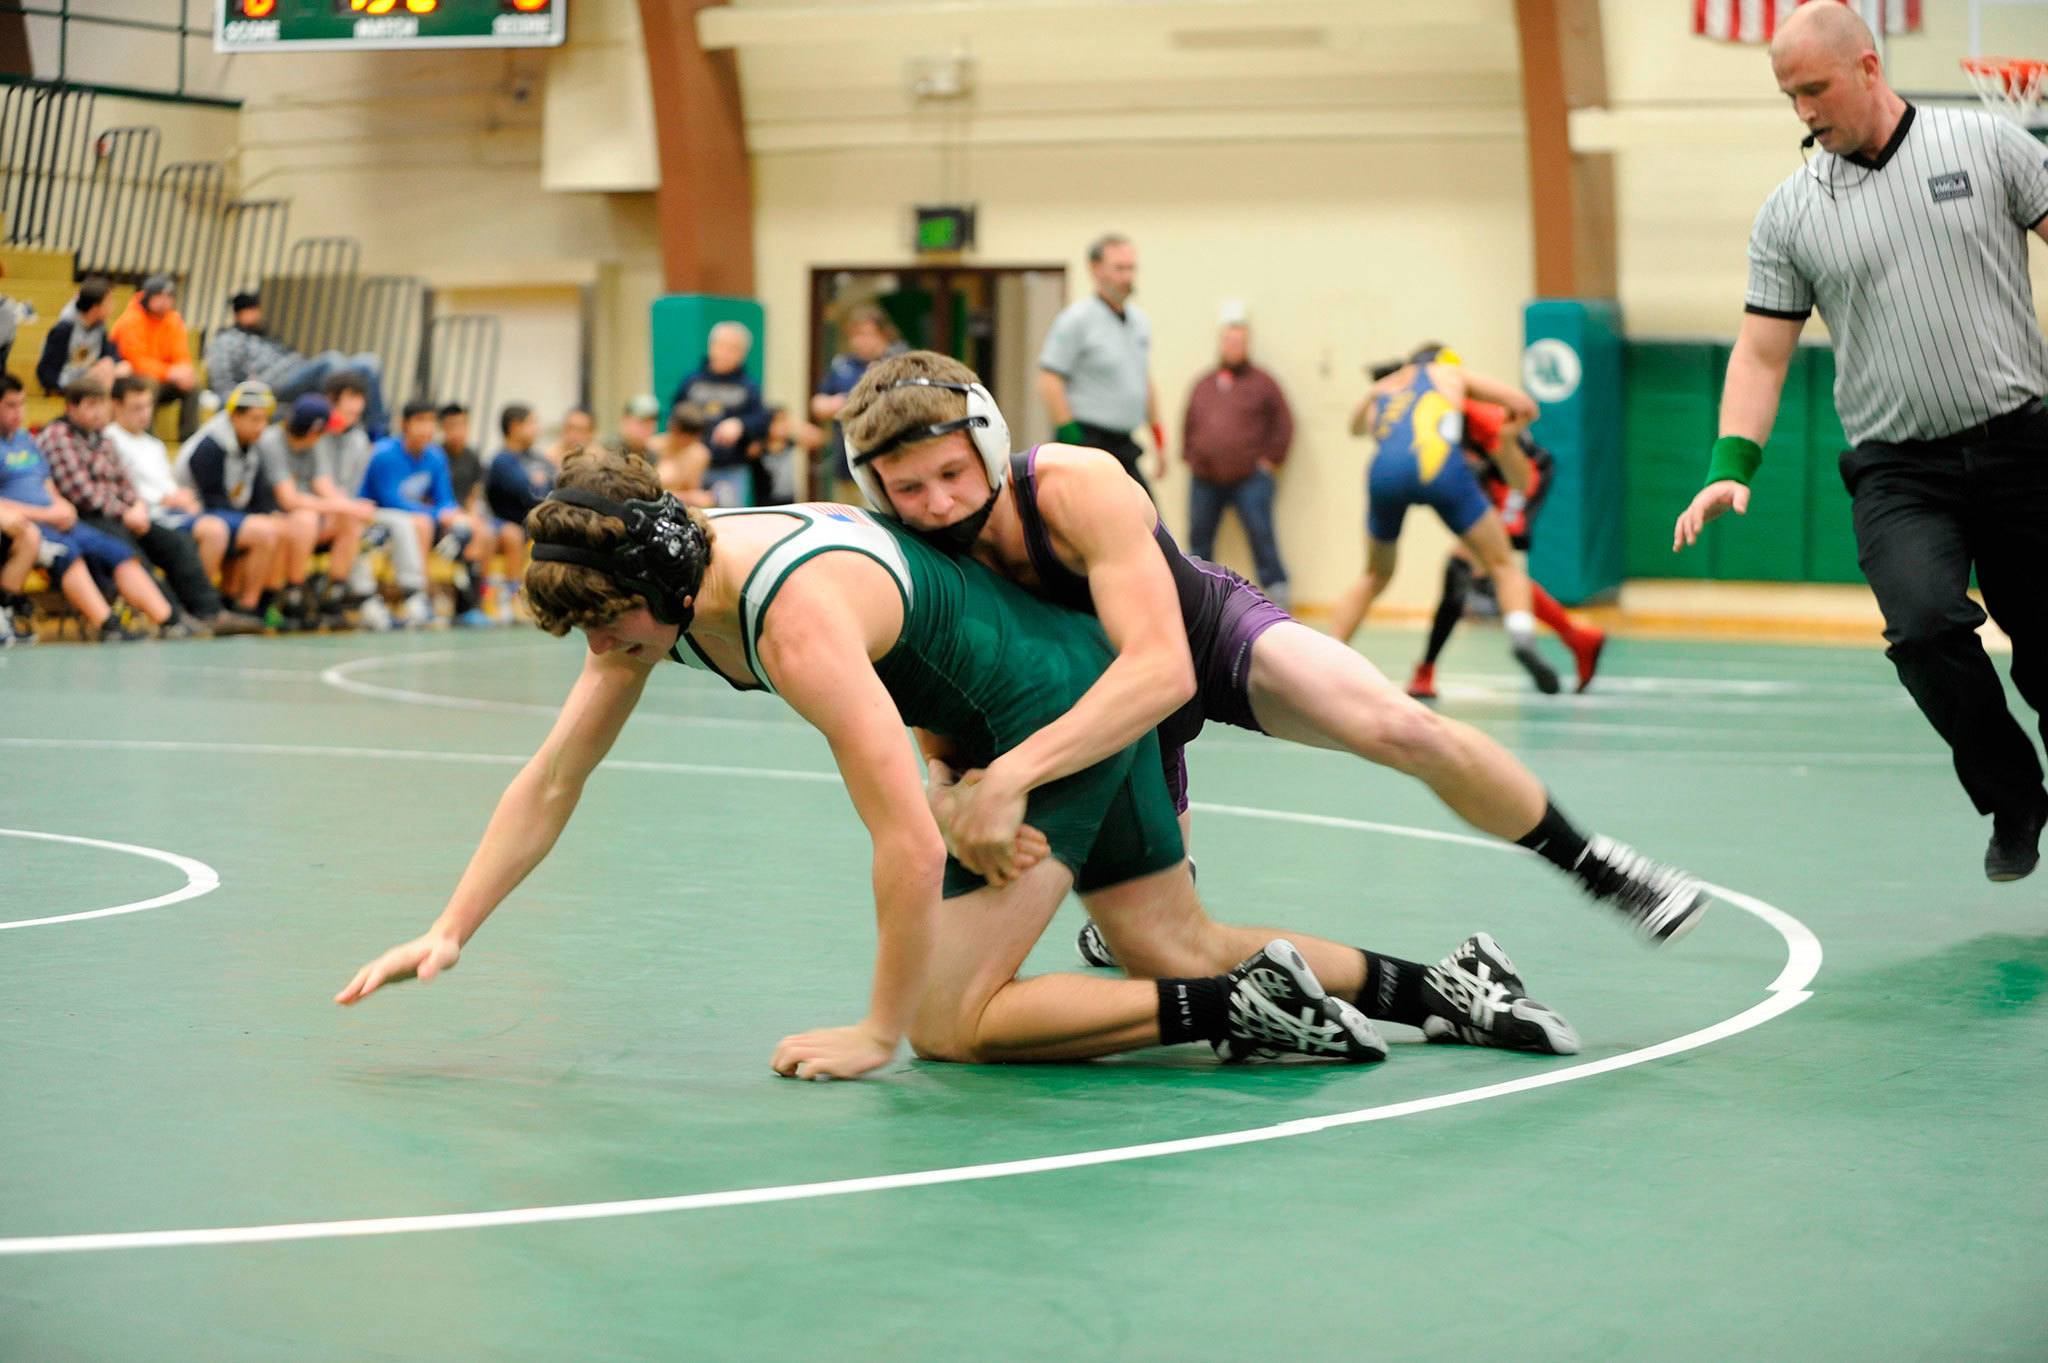 Sequim’s Ben Newell, wrestling at 138 pounds on Jan. 12, against Port Angeles’ Slater Bradley, won his match on Jan. 19, in a dual meet with Kingston. The Wolves won 60-18. Sequim Gazette file photo by Matthew Nash